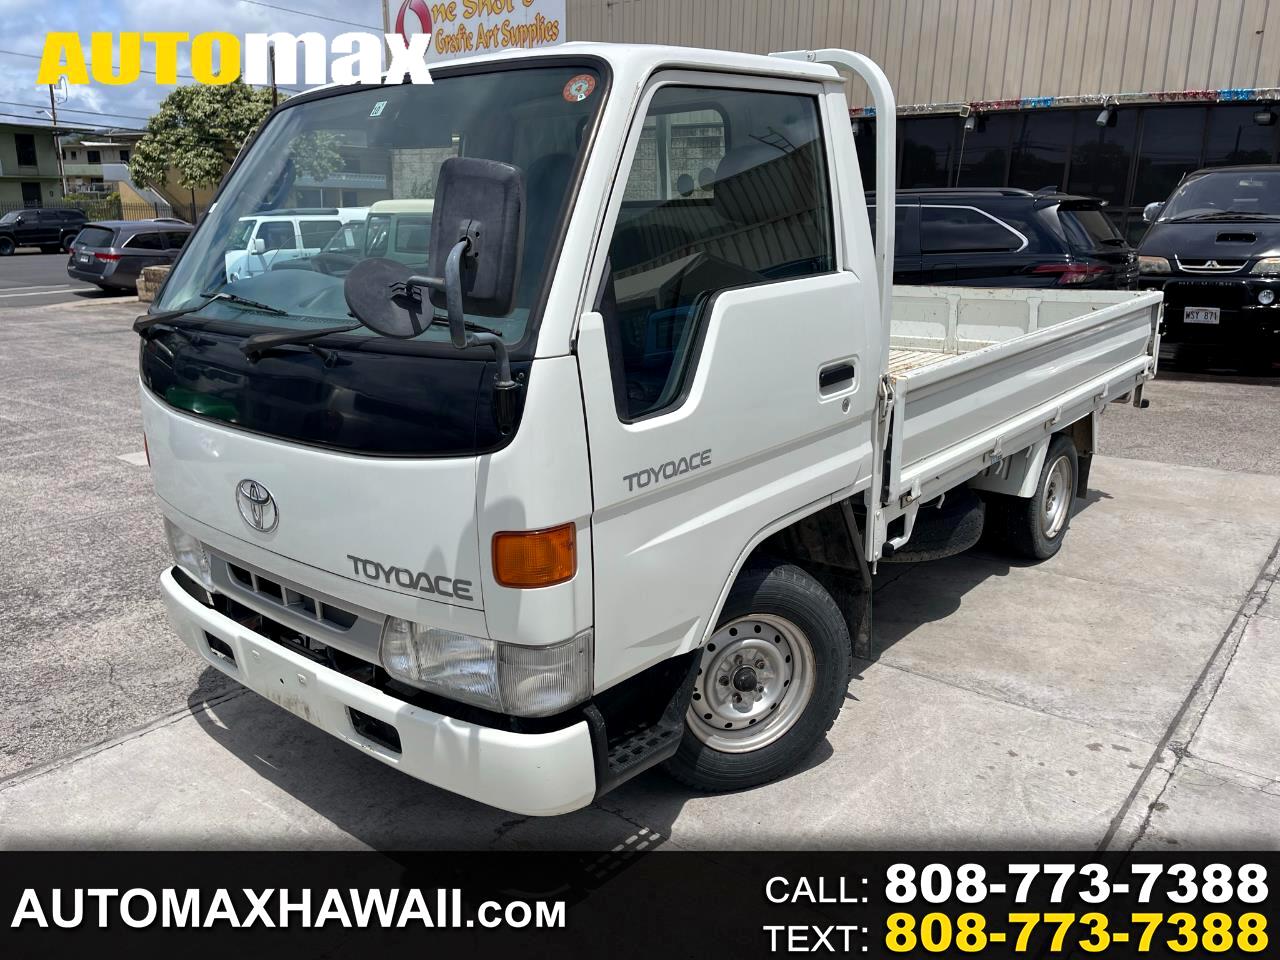 1997 Toyota ToyoAce Truck